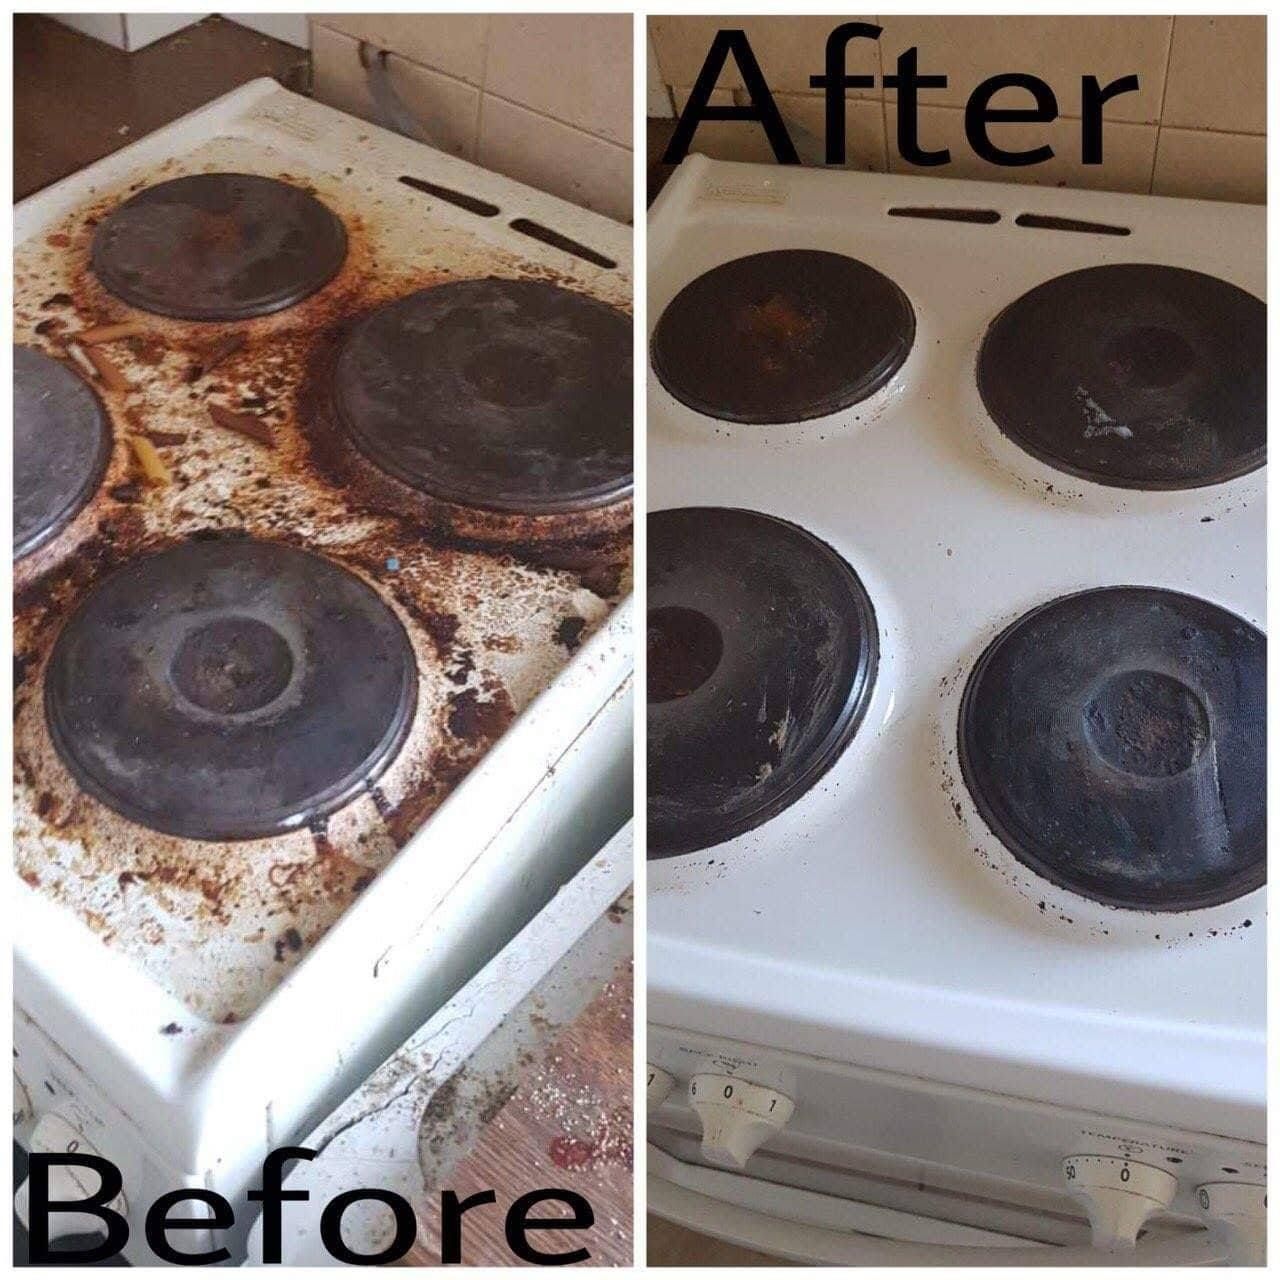 An image showing an oven we cleaned before and after